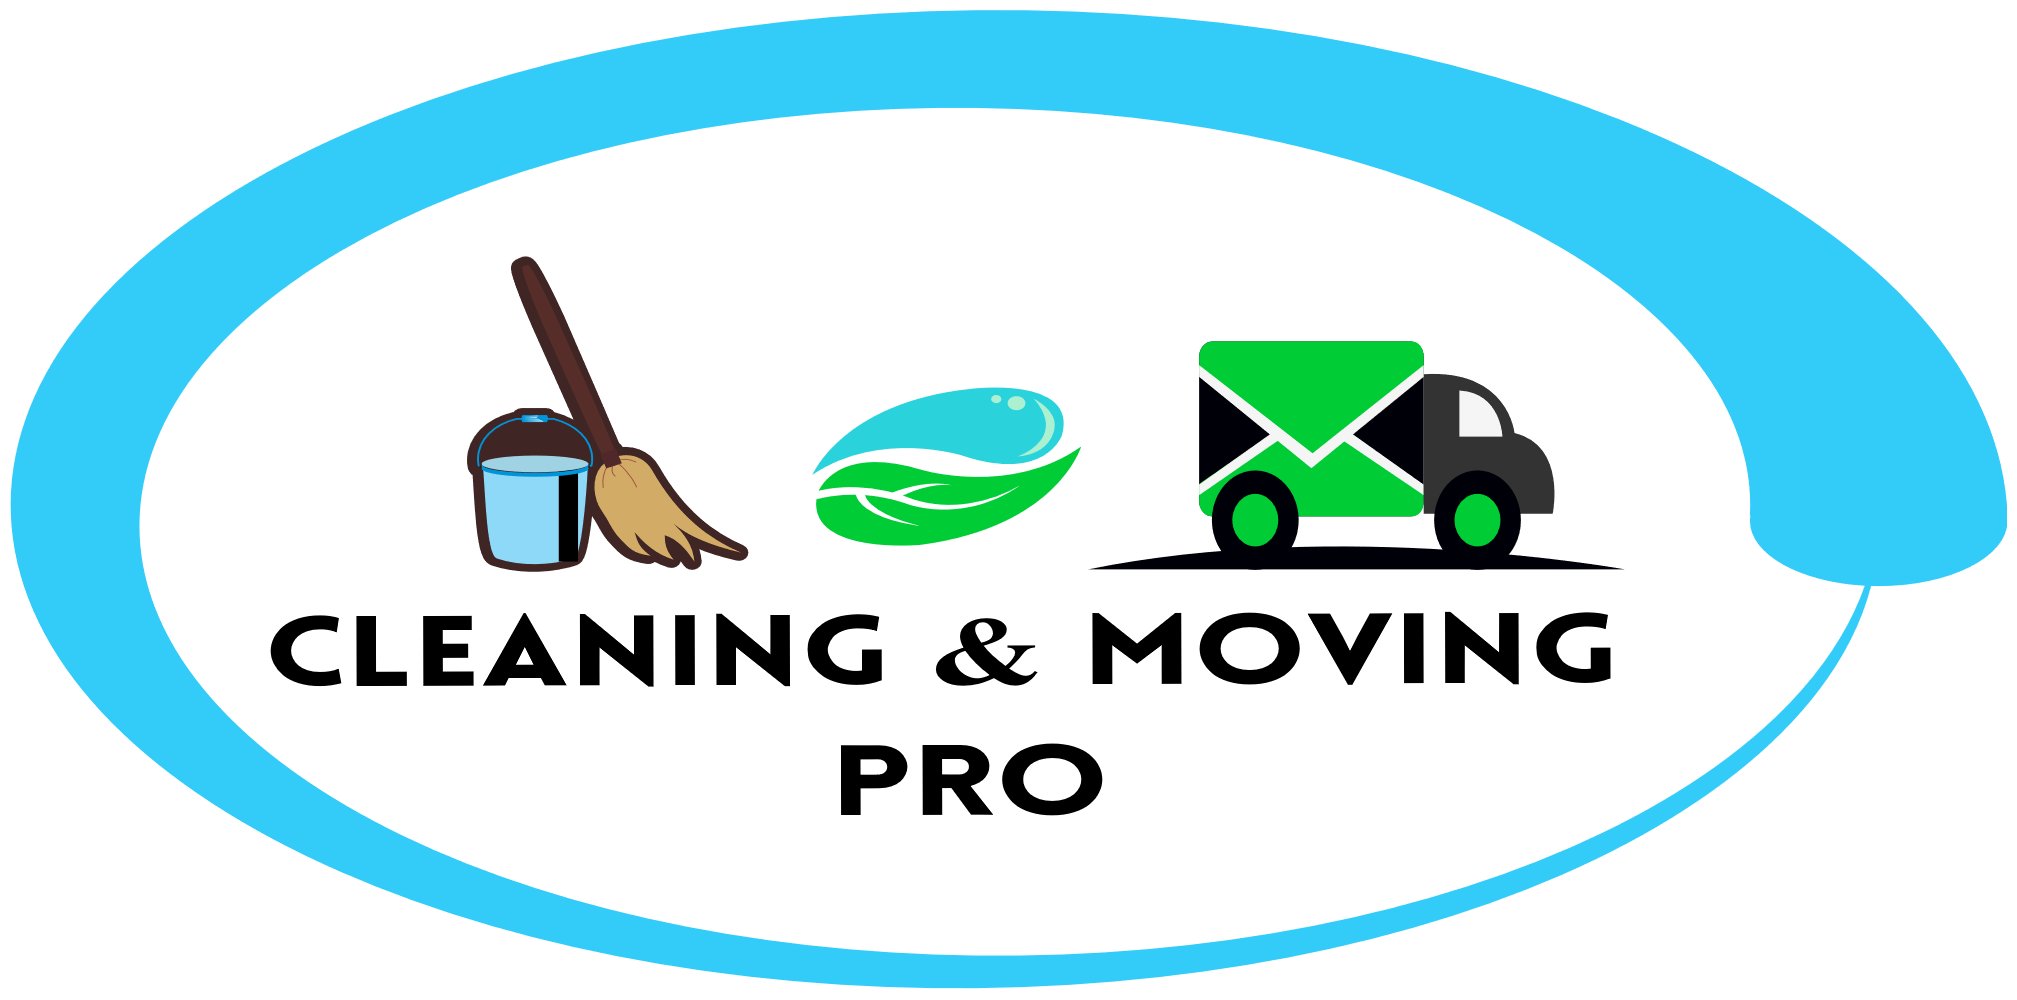 Food Processing and Manufacturing Cleaning Galway / Dublin. Our dedicated, trained professionals committed to ensuring safe work environment for the food industry.-CLEANING AND MOVING PRO